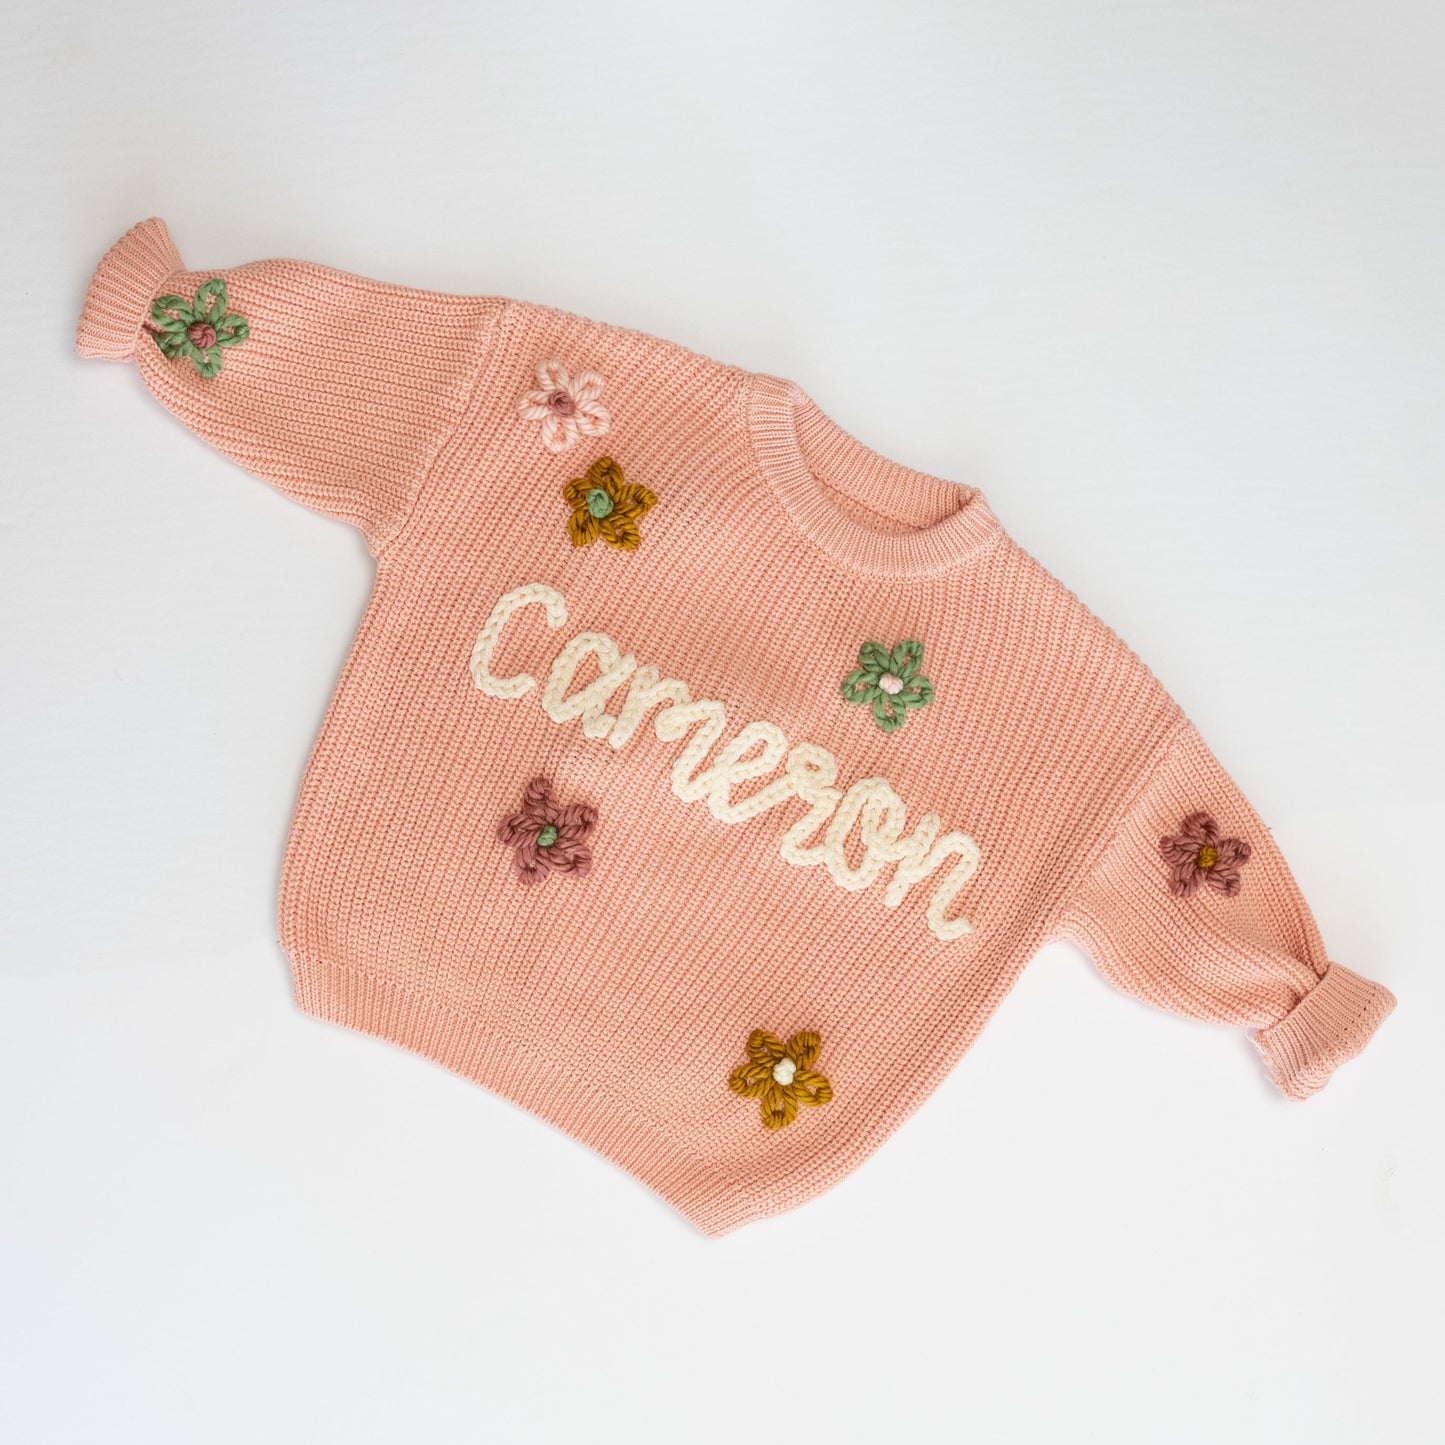 Personalized hand embroidered baby toddler knit name SWEATER – Baeb + Buddy